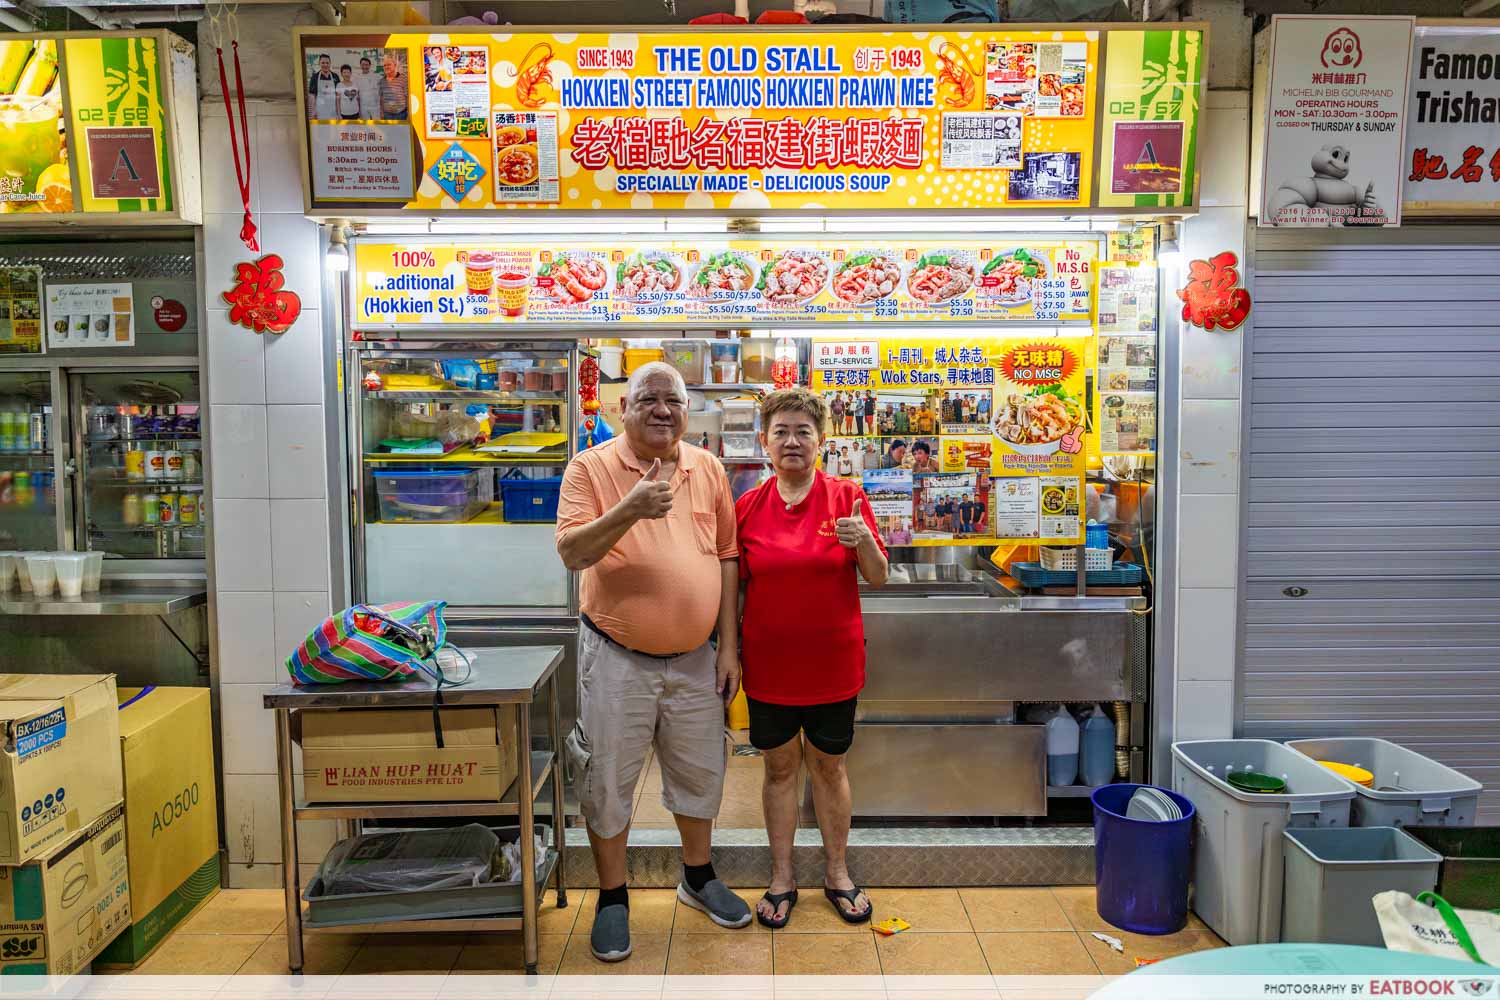 the-old-stall-hokkien-street-famous-prawn-mee-storefront-1